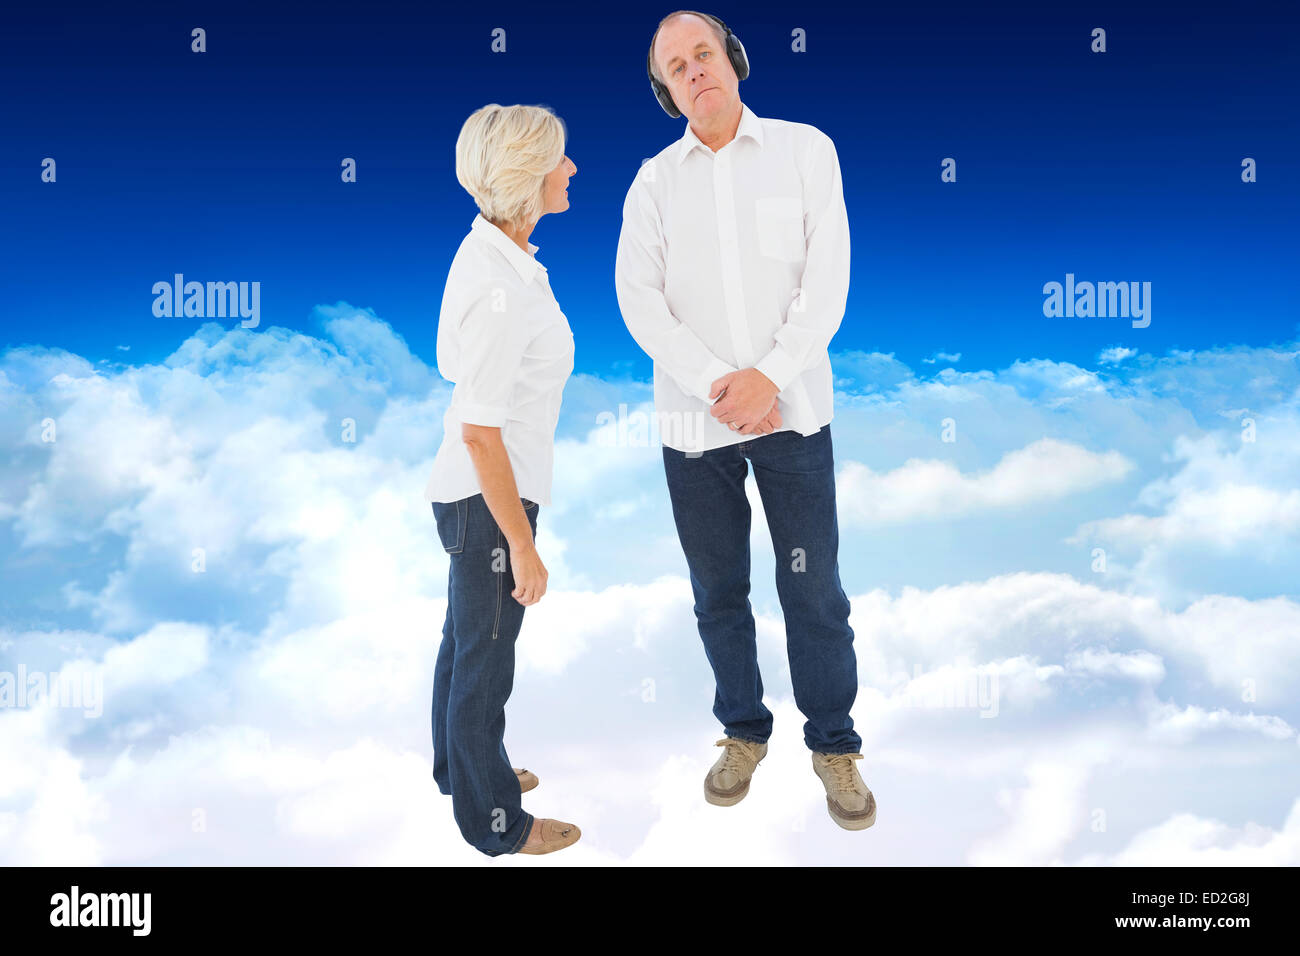 Composite image of annoyed woman being ignored by her partner Stock Photo